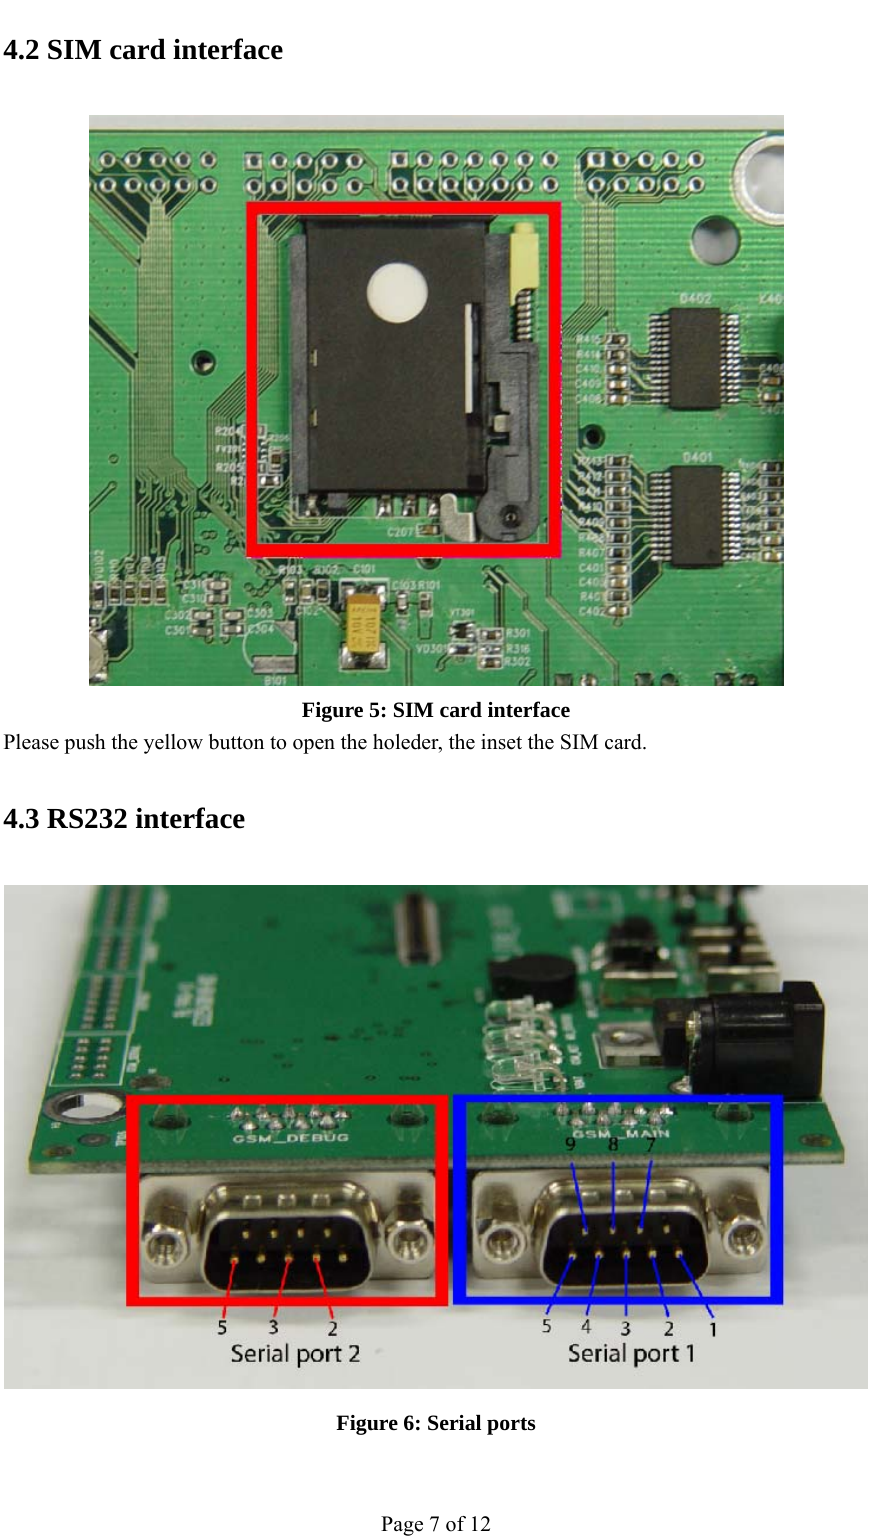                                           4.2 SIM card interface  Figure 5: SIM card interface Please push the yellow button to open the holeder, the inset the SIM card. 4.3 RS232 interface  Figure 6: Serial ports Page 7 of 12 